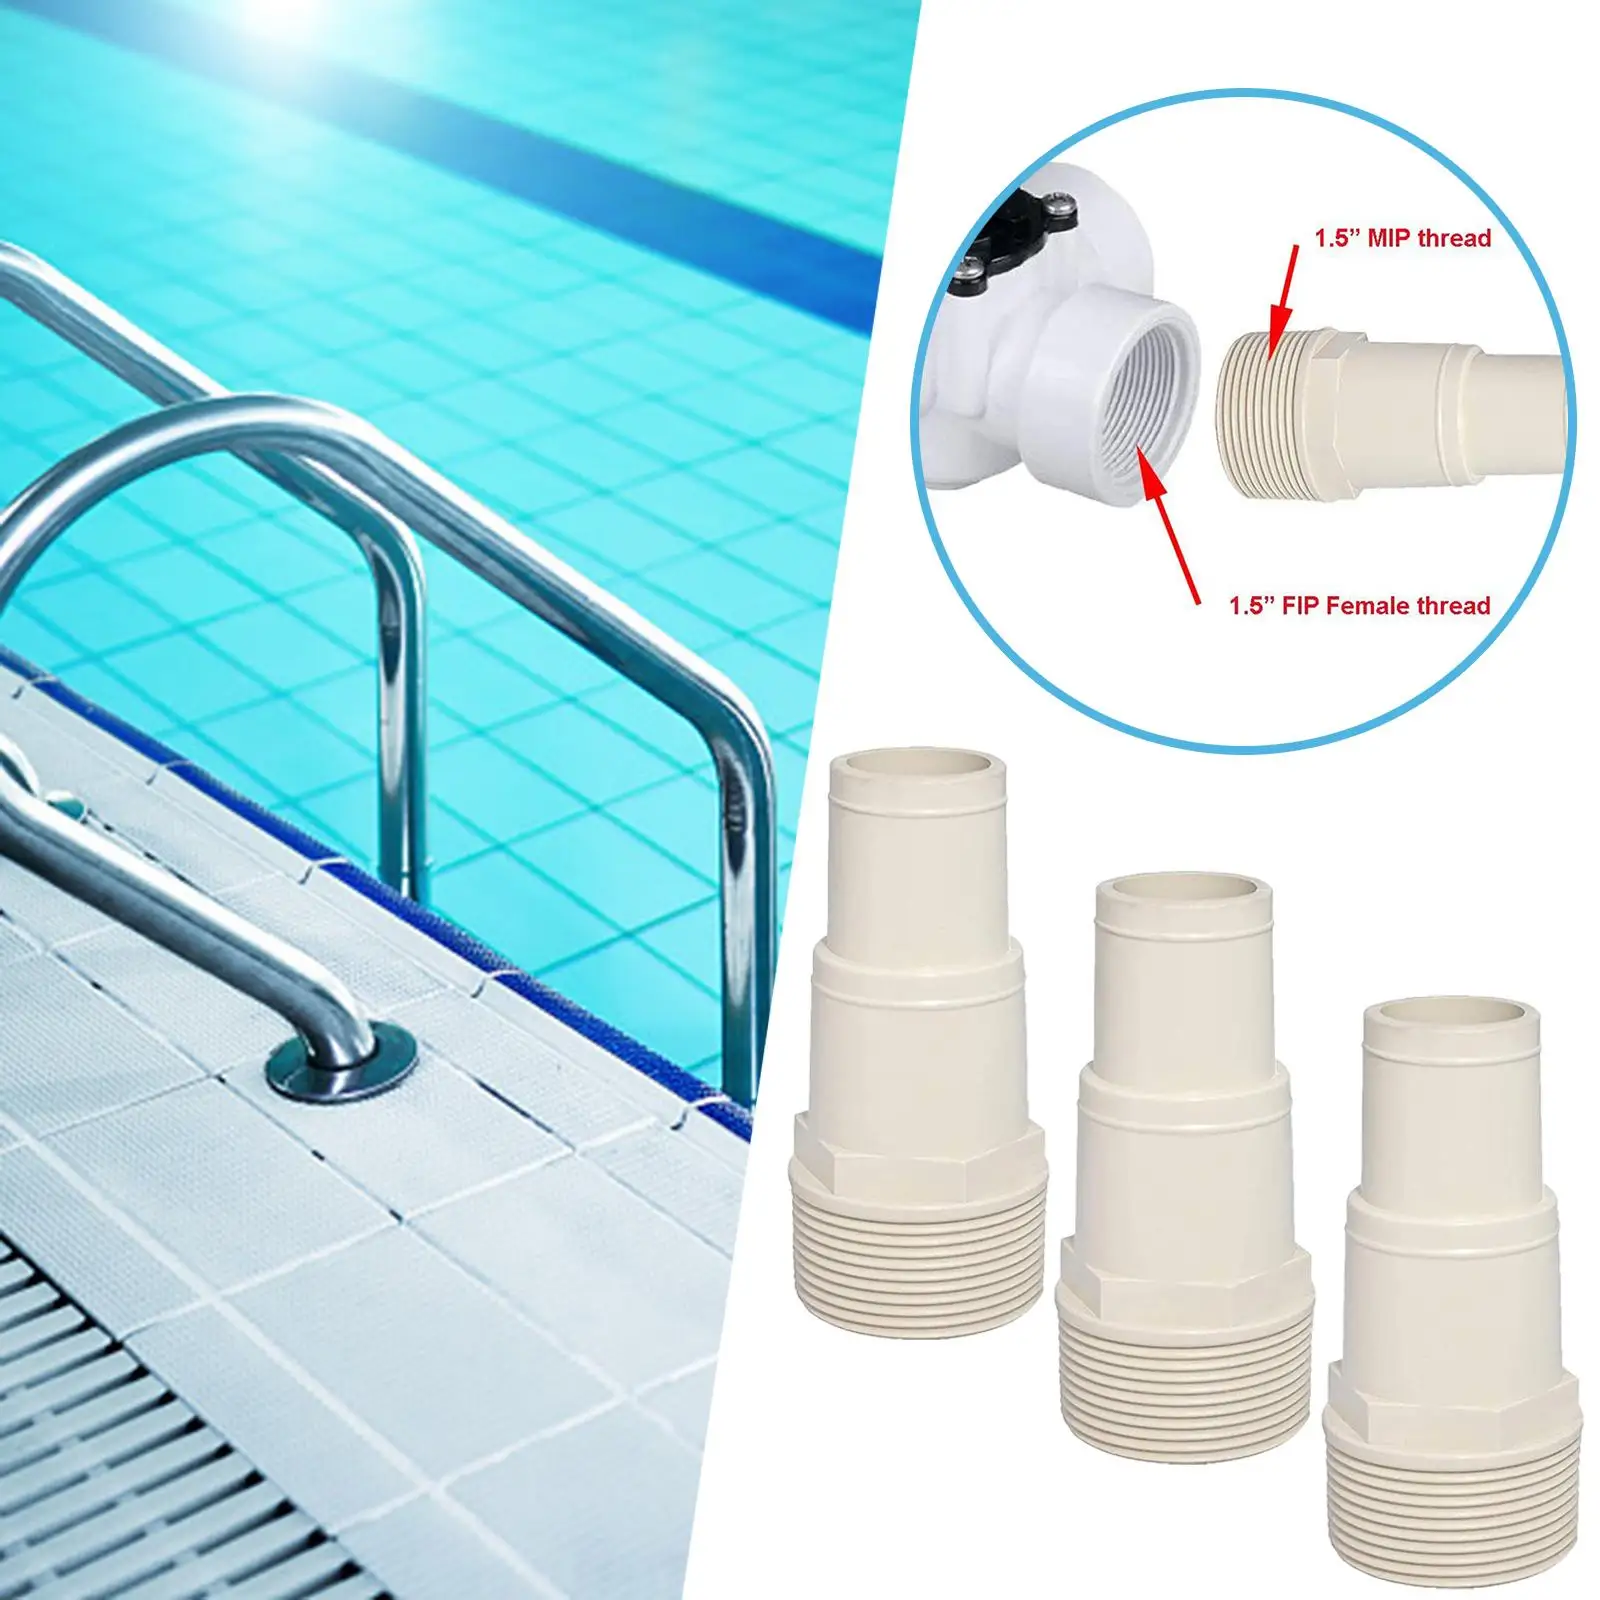 3Pcs 1.5 inch and 1.25 inch Hose Adapters Pool Filter Pump Hose Adapter for above Ground Pool Pump Skimmer Plumbing Connection